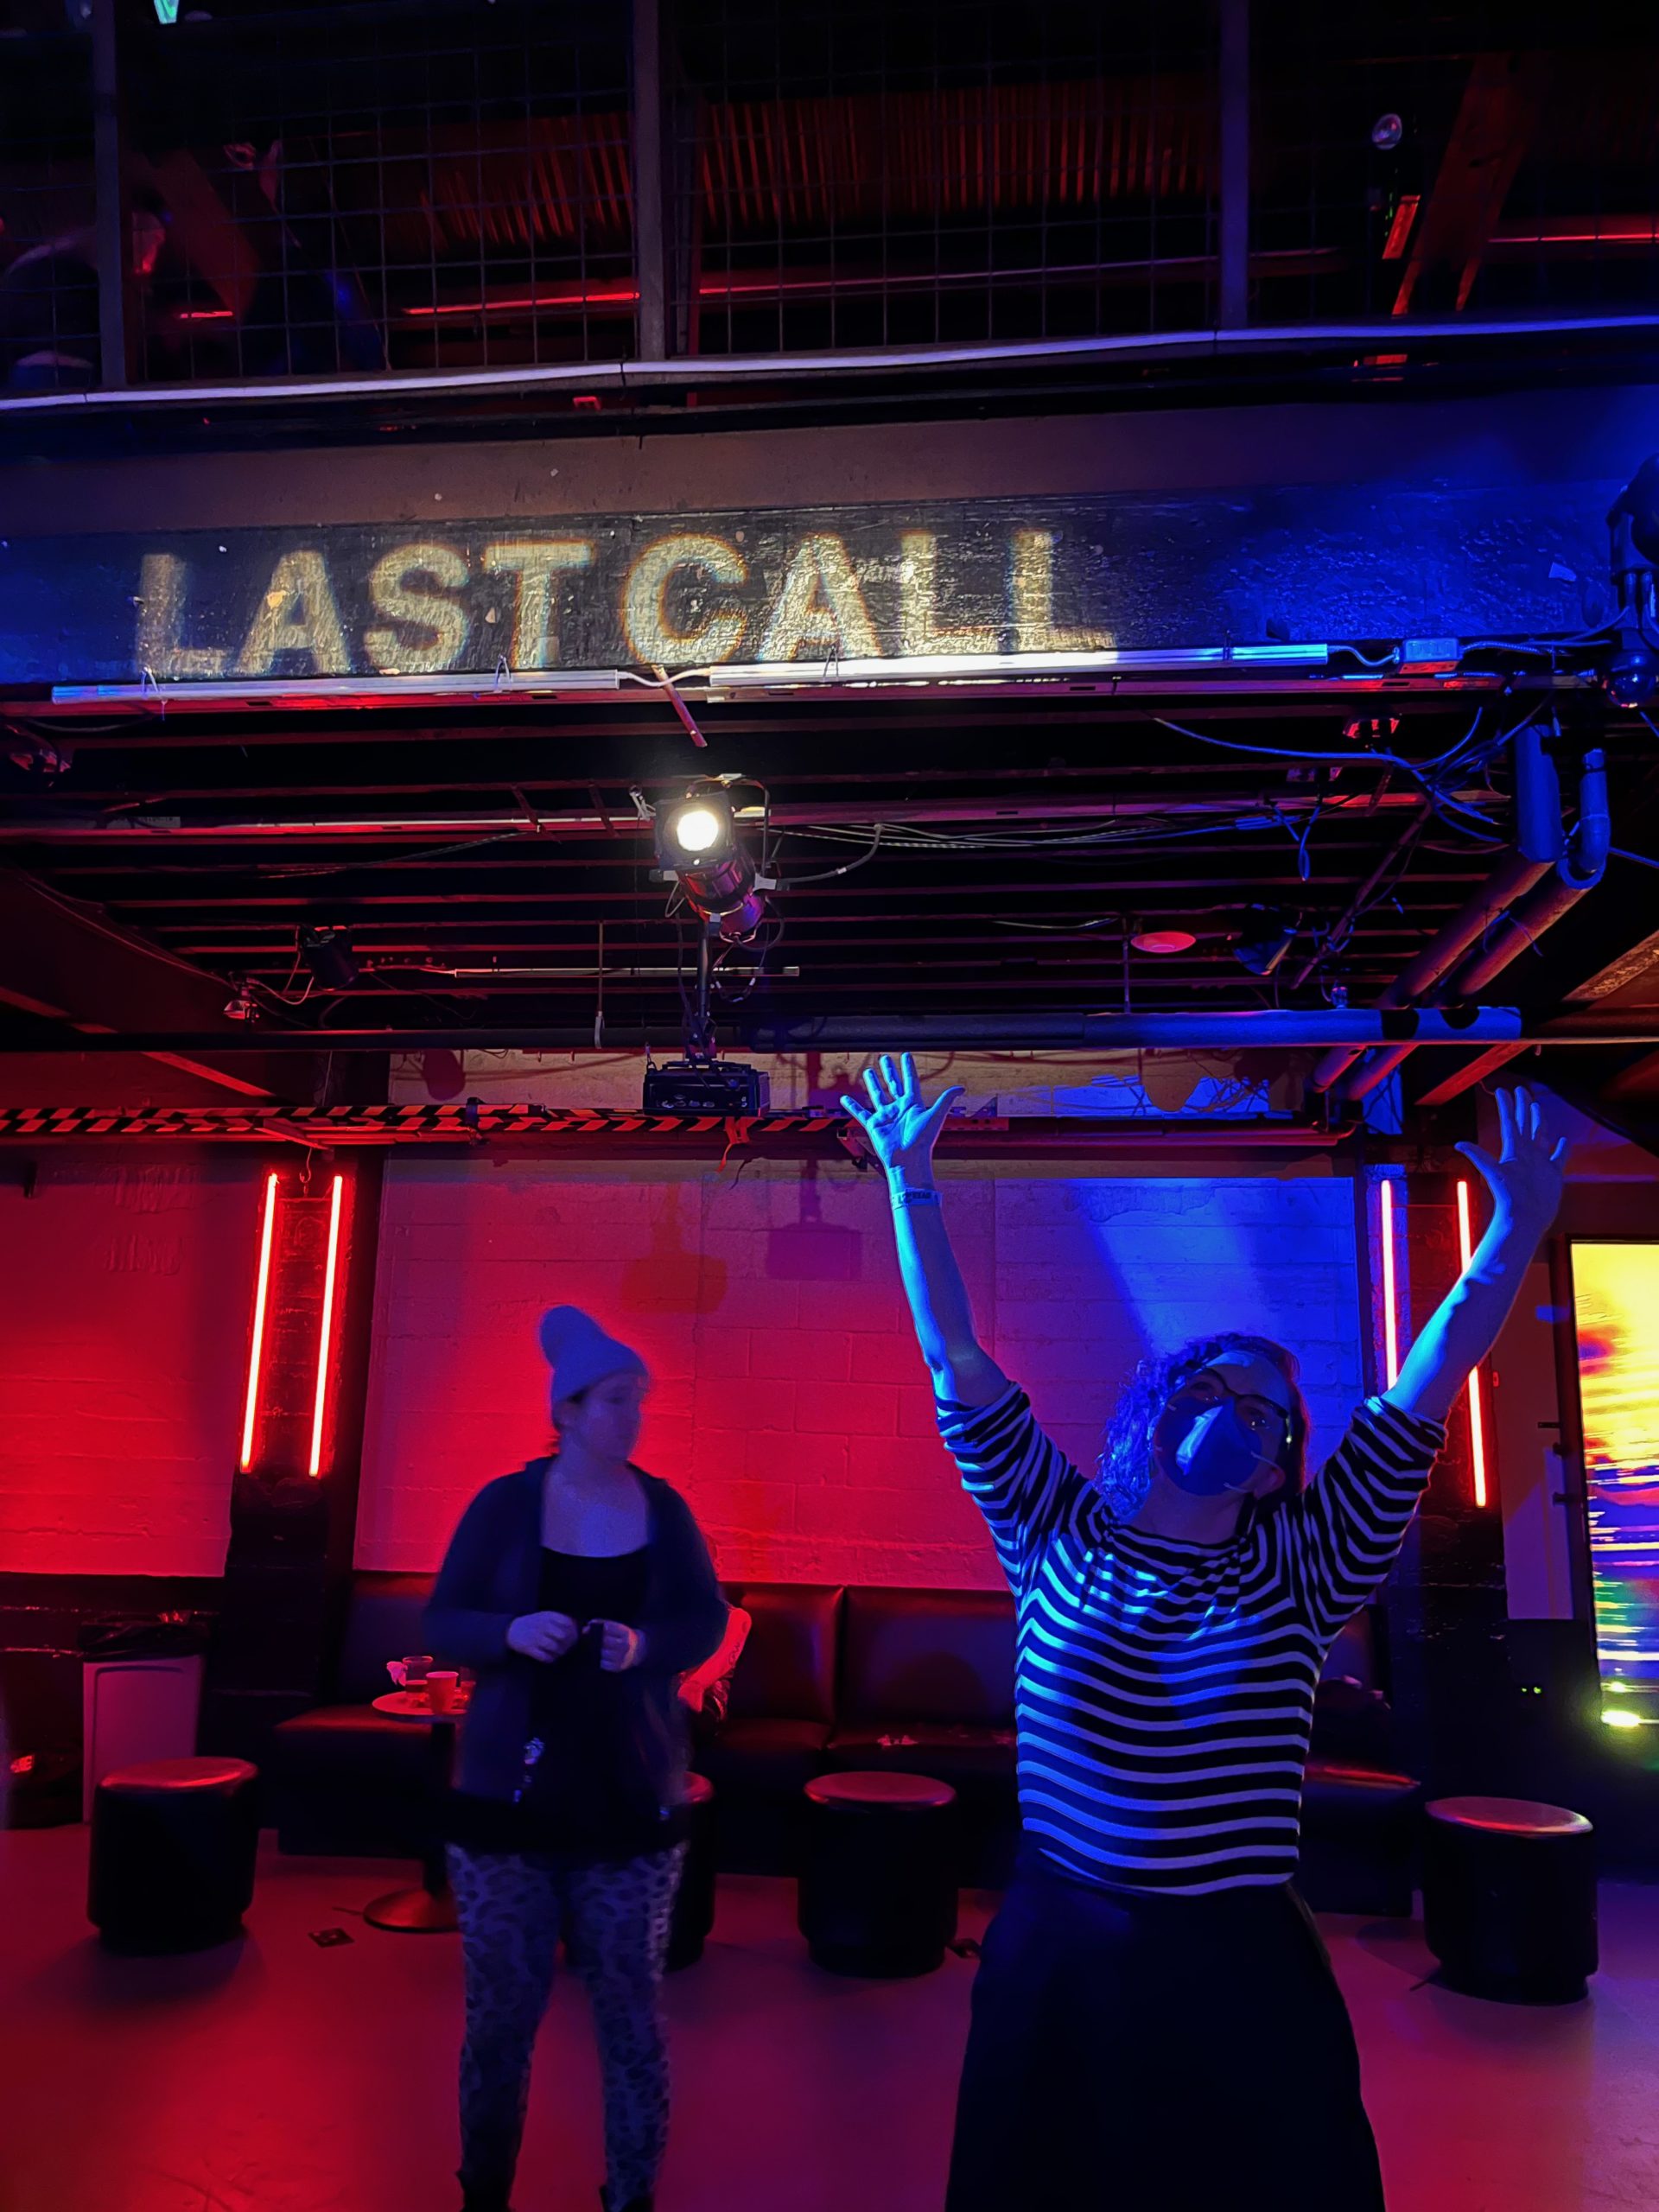 The author, hands in the air, in a black-and-white striped shirt and black skirt, in a red-lit bar with LAST CALL in light against a wall overhead, an unwitting bystander behind her who probably wishes to be excluded from this narrative